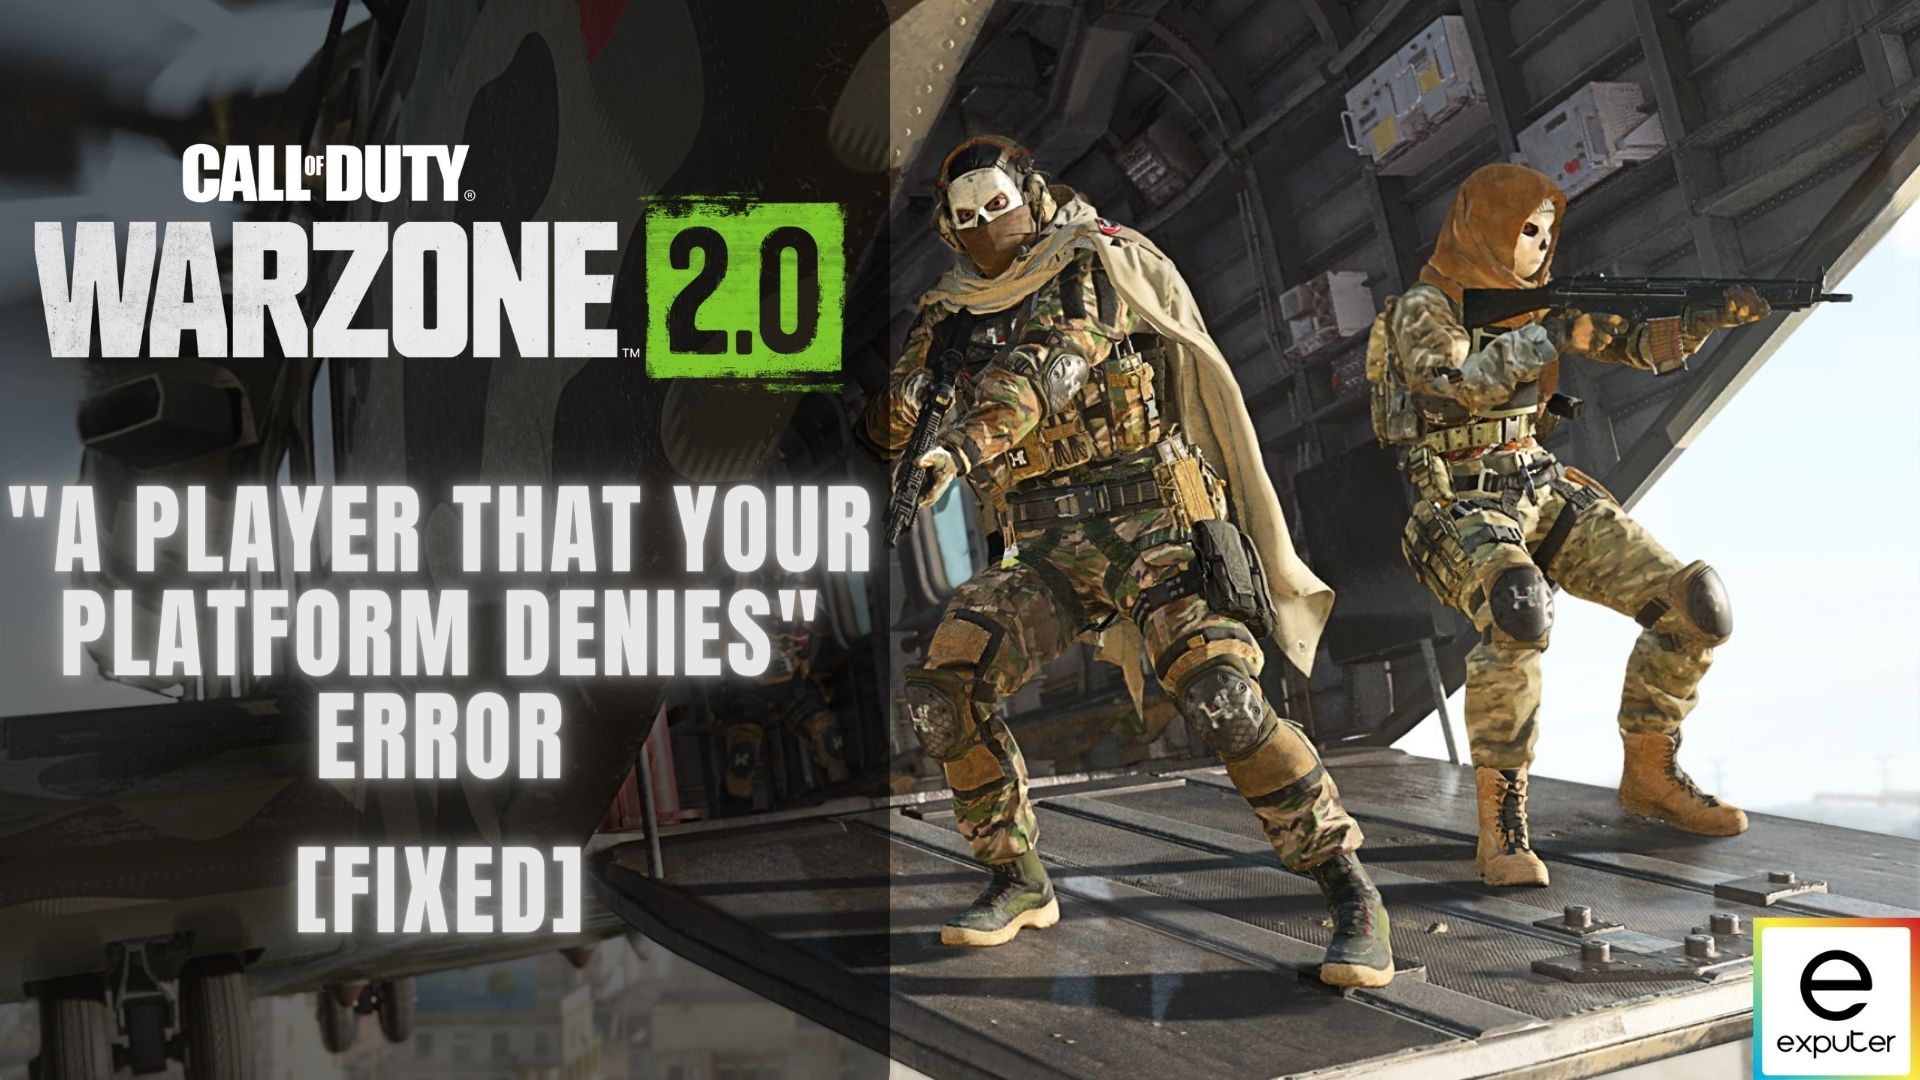 Didn't they promise that Warzone 2.0 would be a separate app from